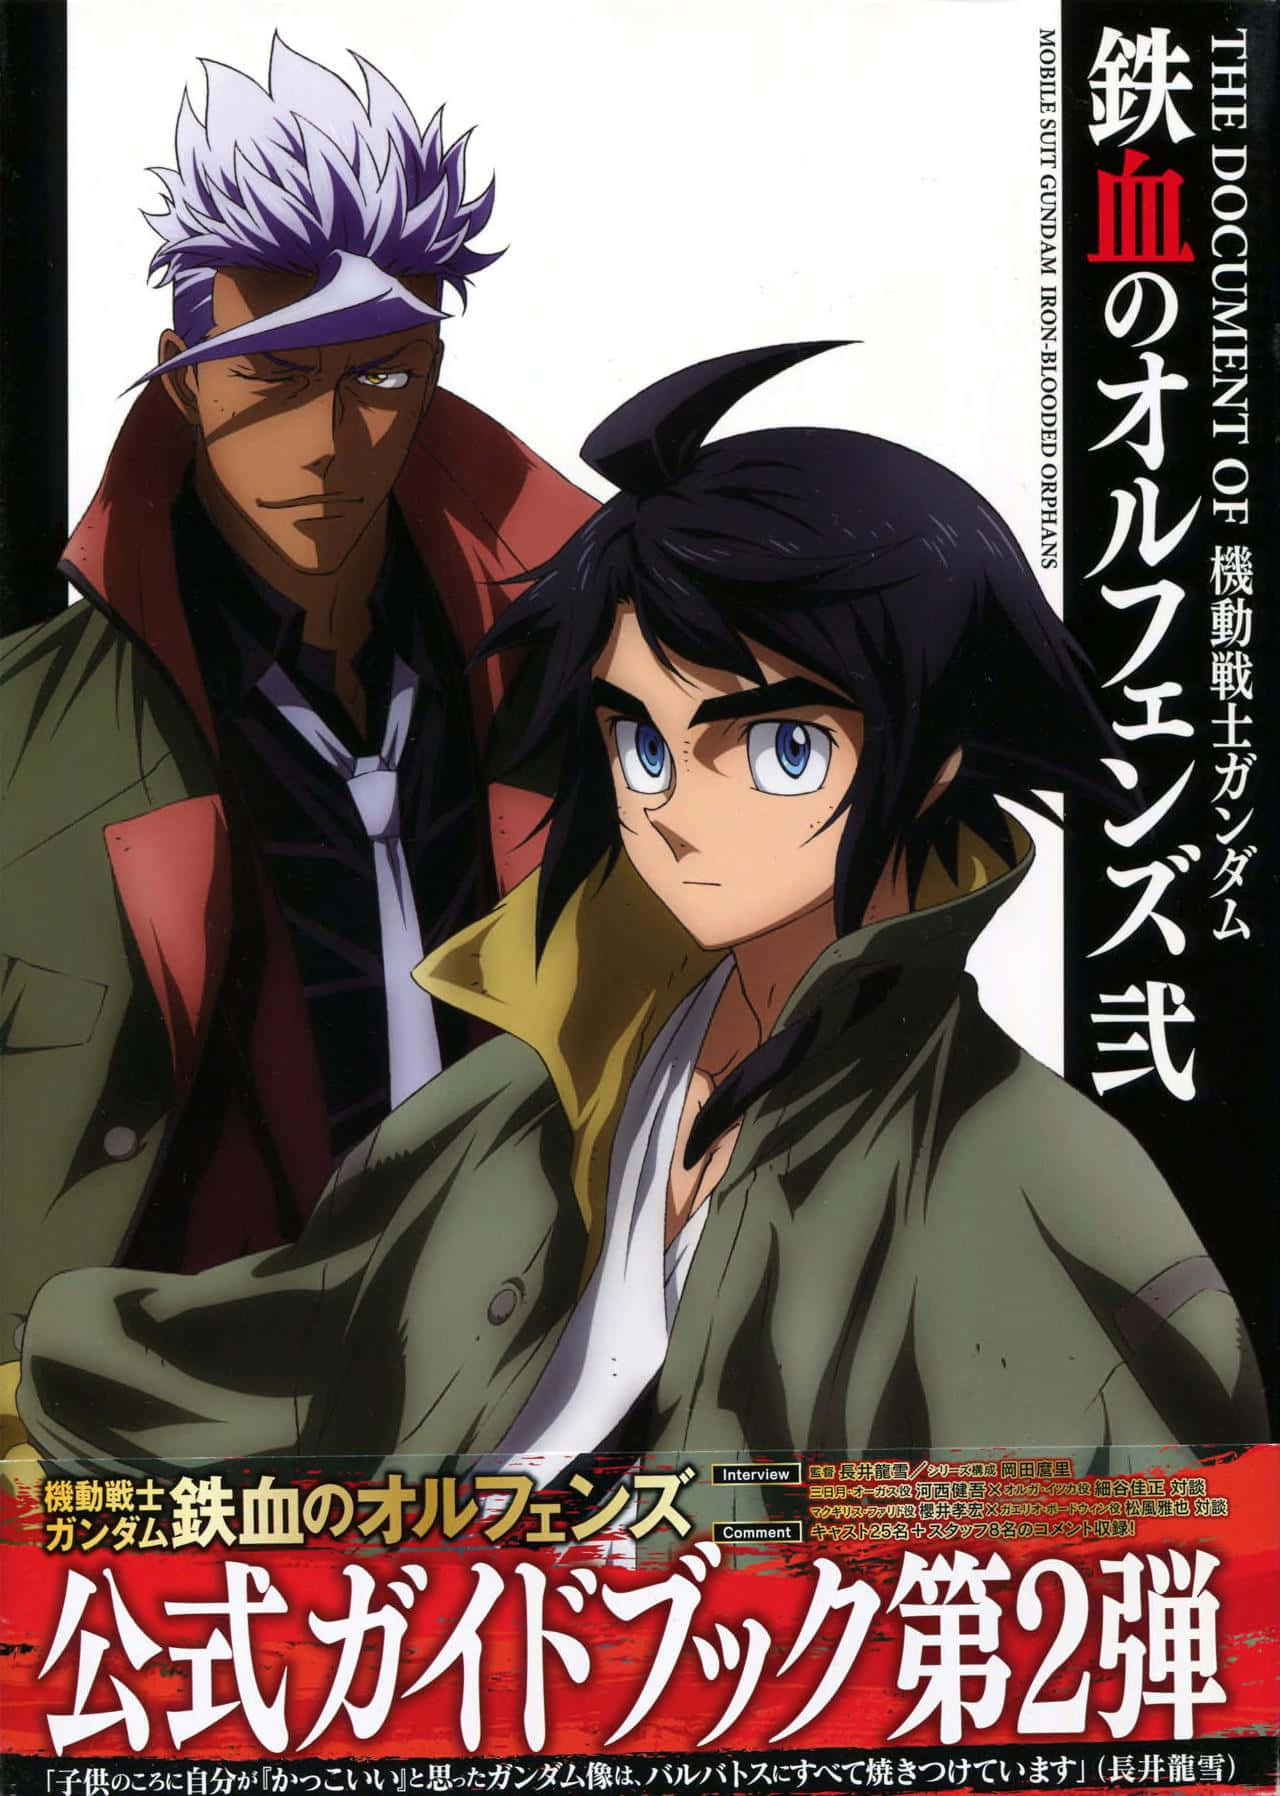 Mobile Suit Gundam Iron-Blooded Orphans - The War-Torn Witness to a New Future Wallpaper